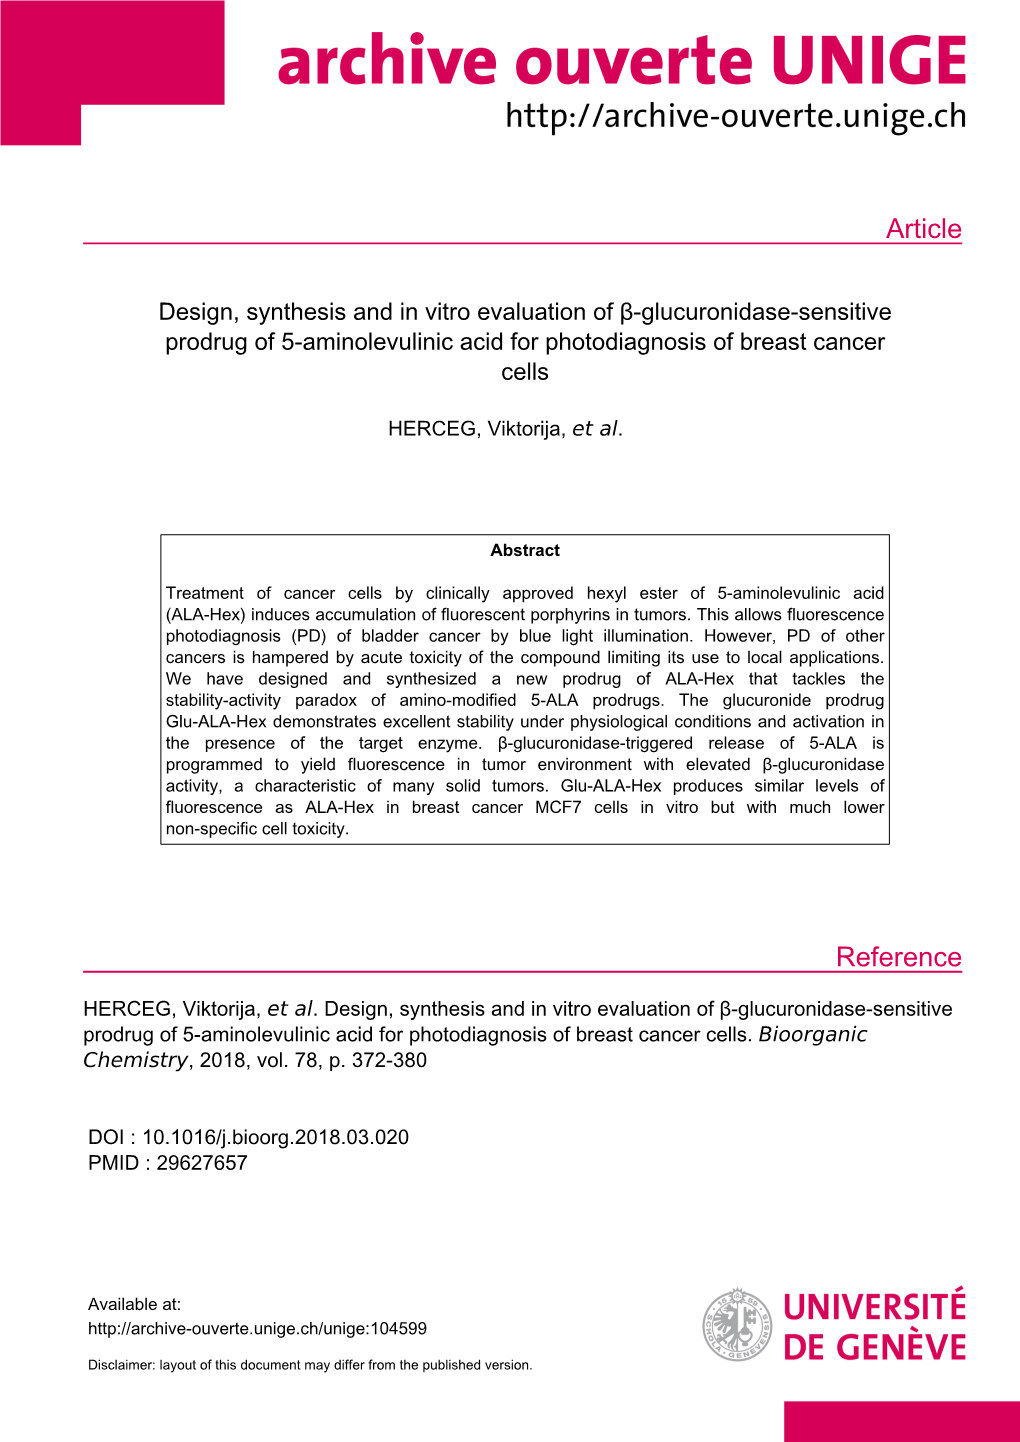 Design, Synthesis and in Vitro Evaluation of Β-Glucuronidase-Sensitive Prodrug of 5-Aminolevulinic Acid for Photodiagnosis of Breast Cancer Cells